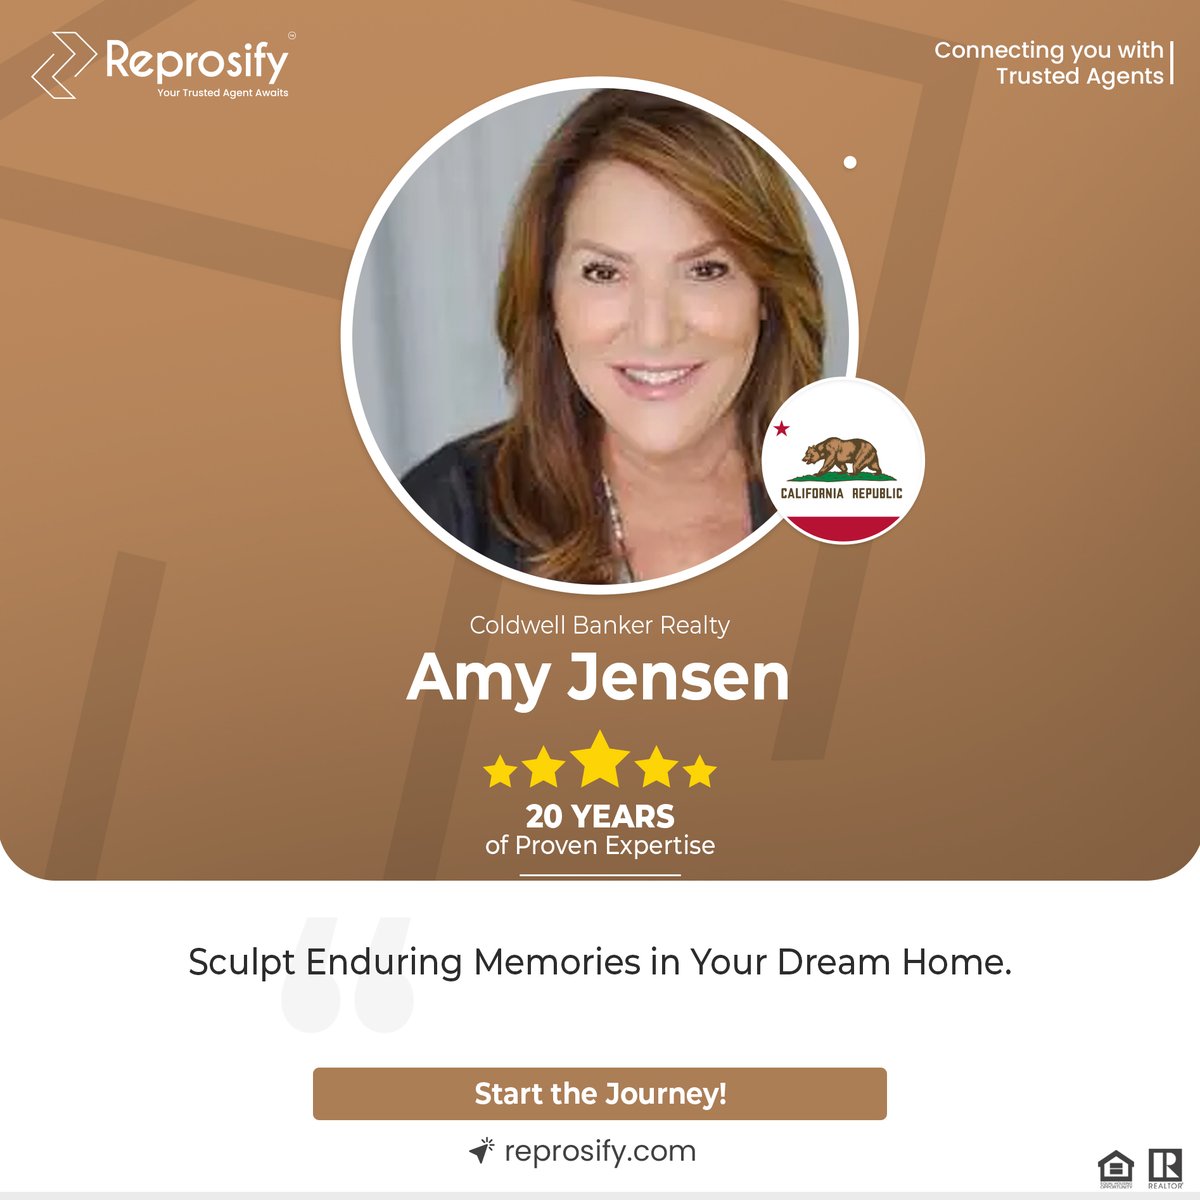 Amy Jensen in California turns your dream into reality. let's embark on your dream escapade.

👤agents.reprosify.com/amy-jensen
.
#Reprosify #AgentsReprosify #ColdwellBankerRealty #AmyJensen #realestate #realtor #realestateagent #Broker #Californiarealestate #Encinitasrealestate